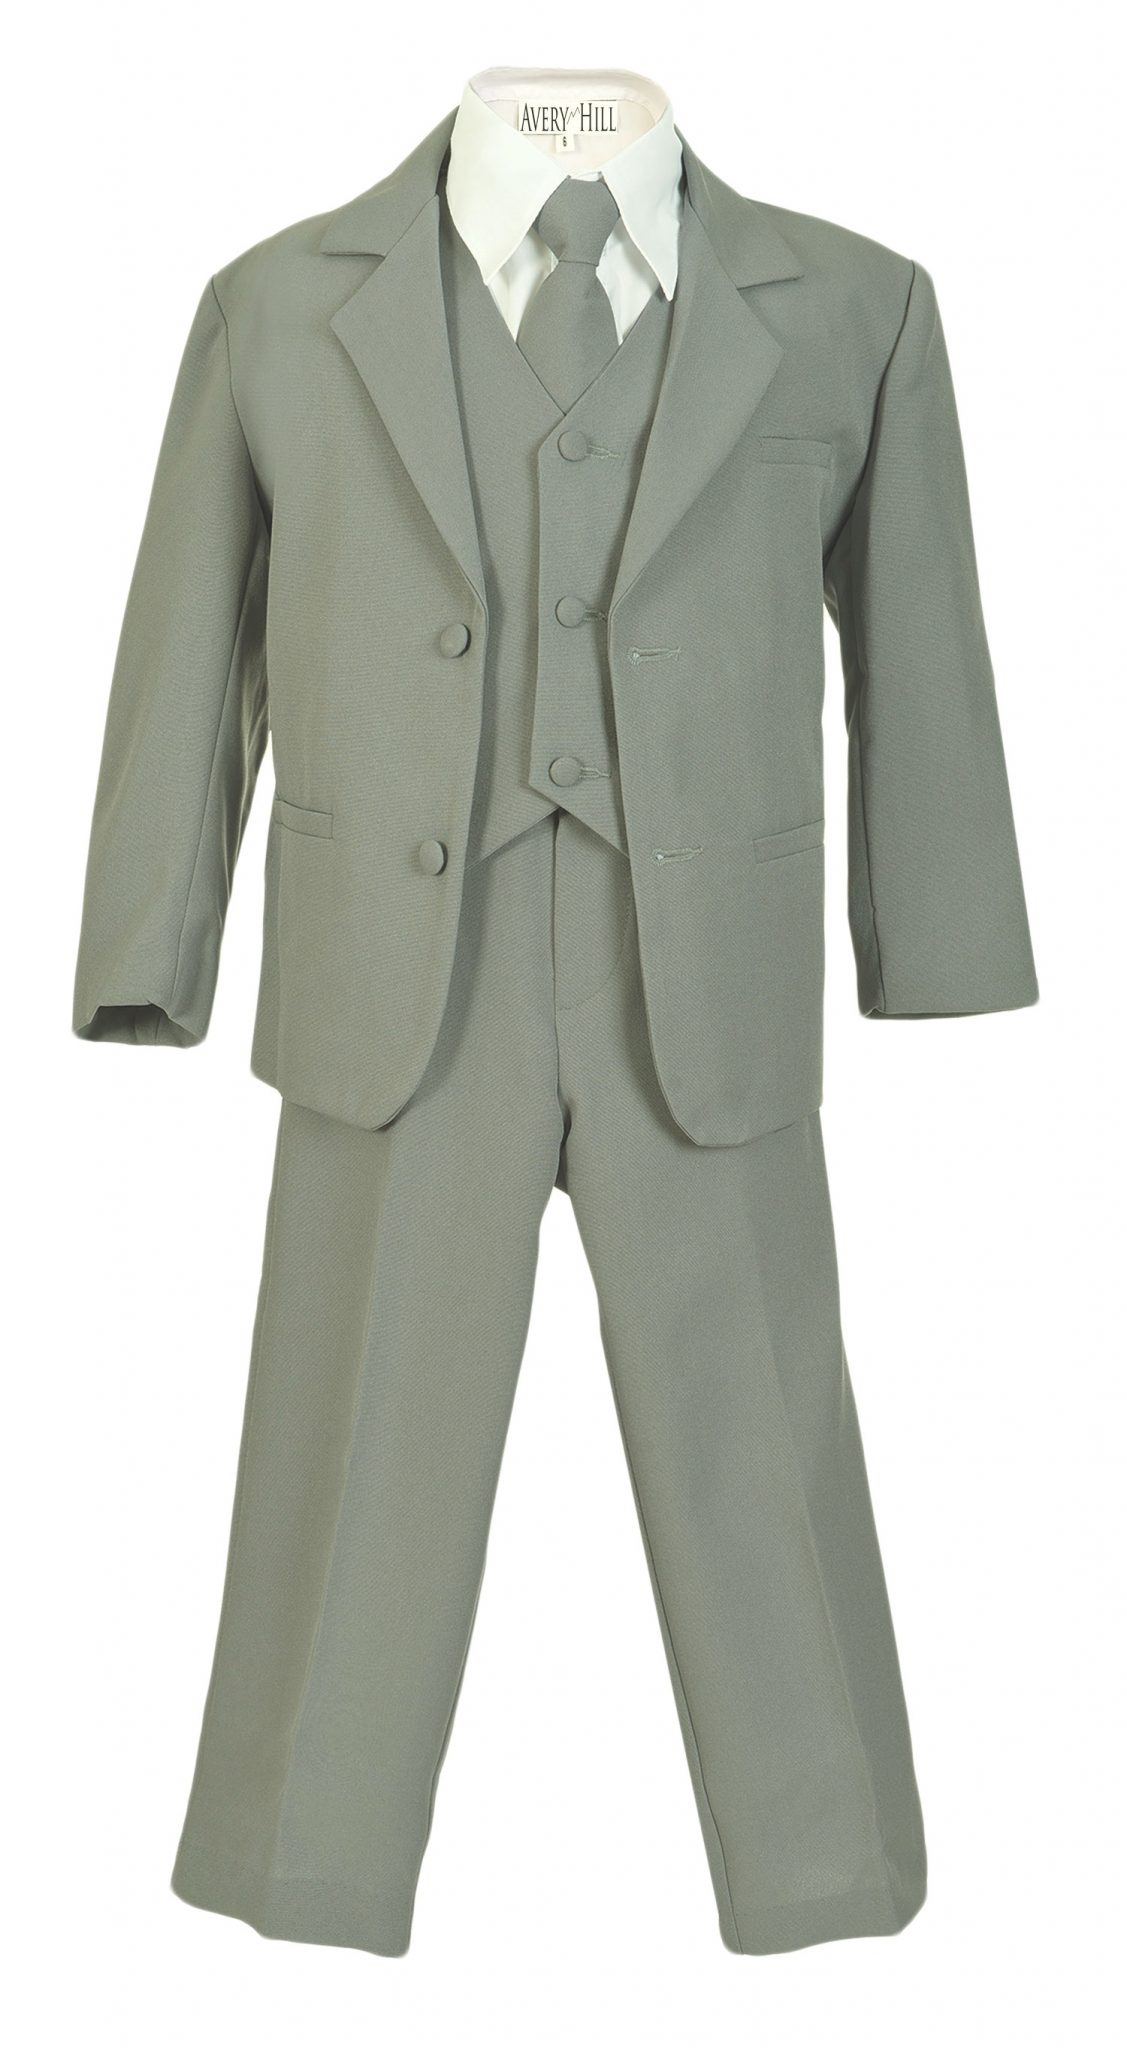 Avery Hill Boys Formal 5 Piece Suit with Shirt and Vest Silver White - 18